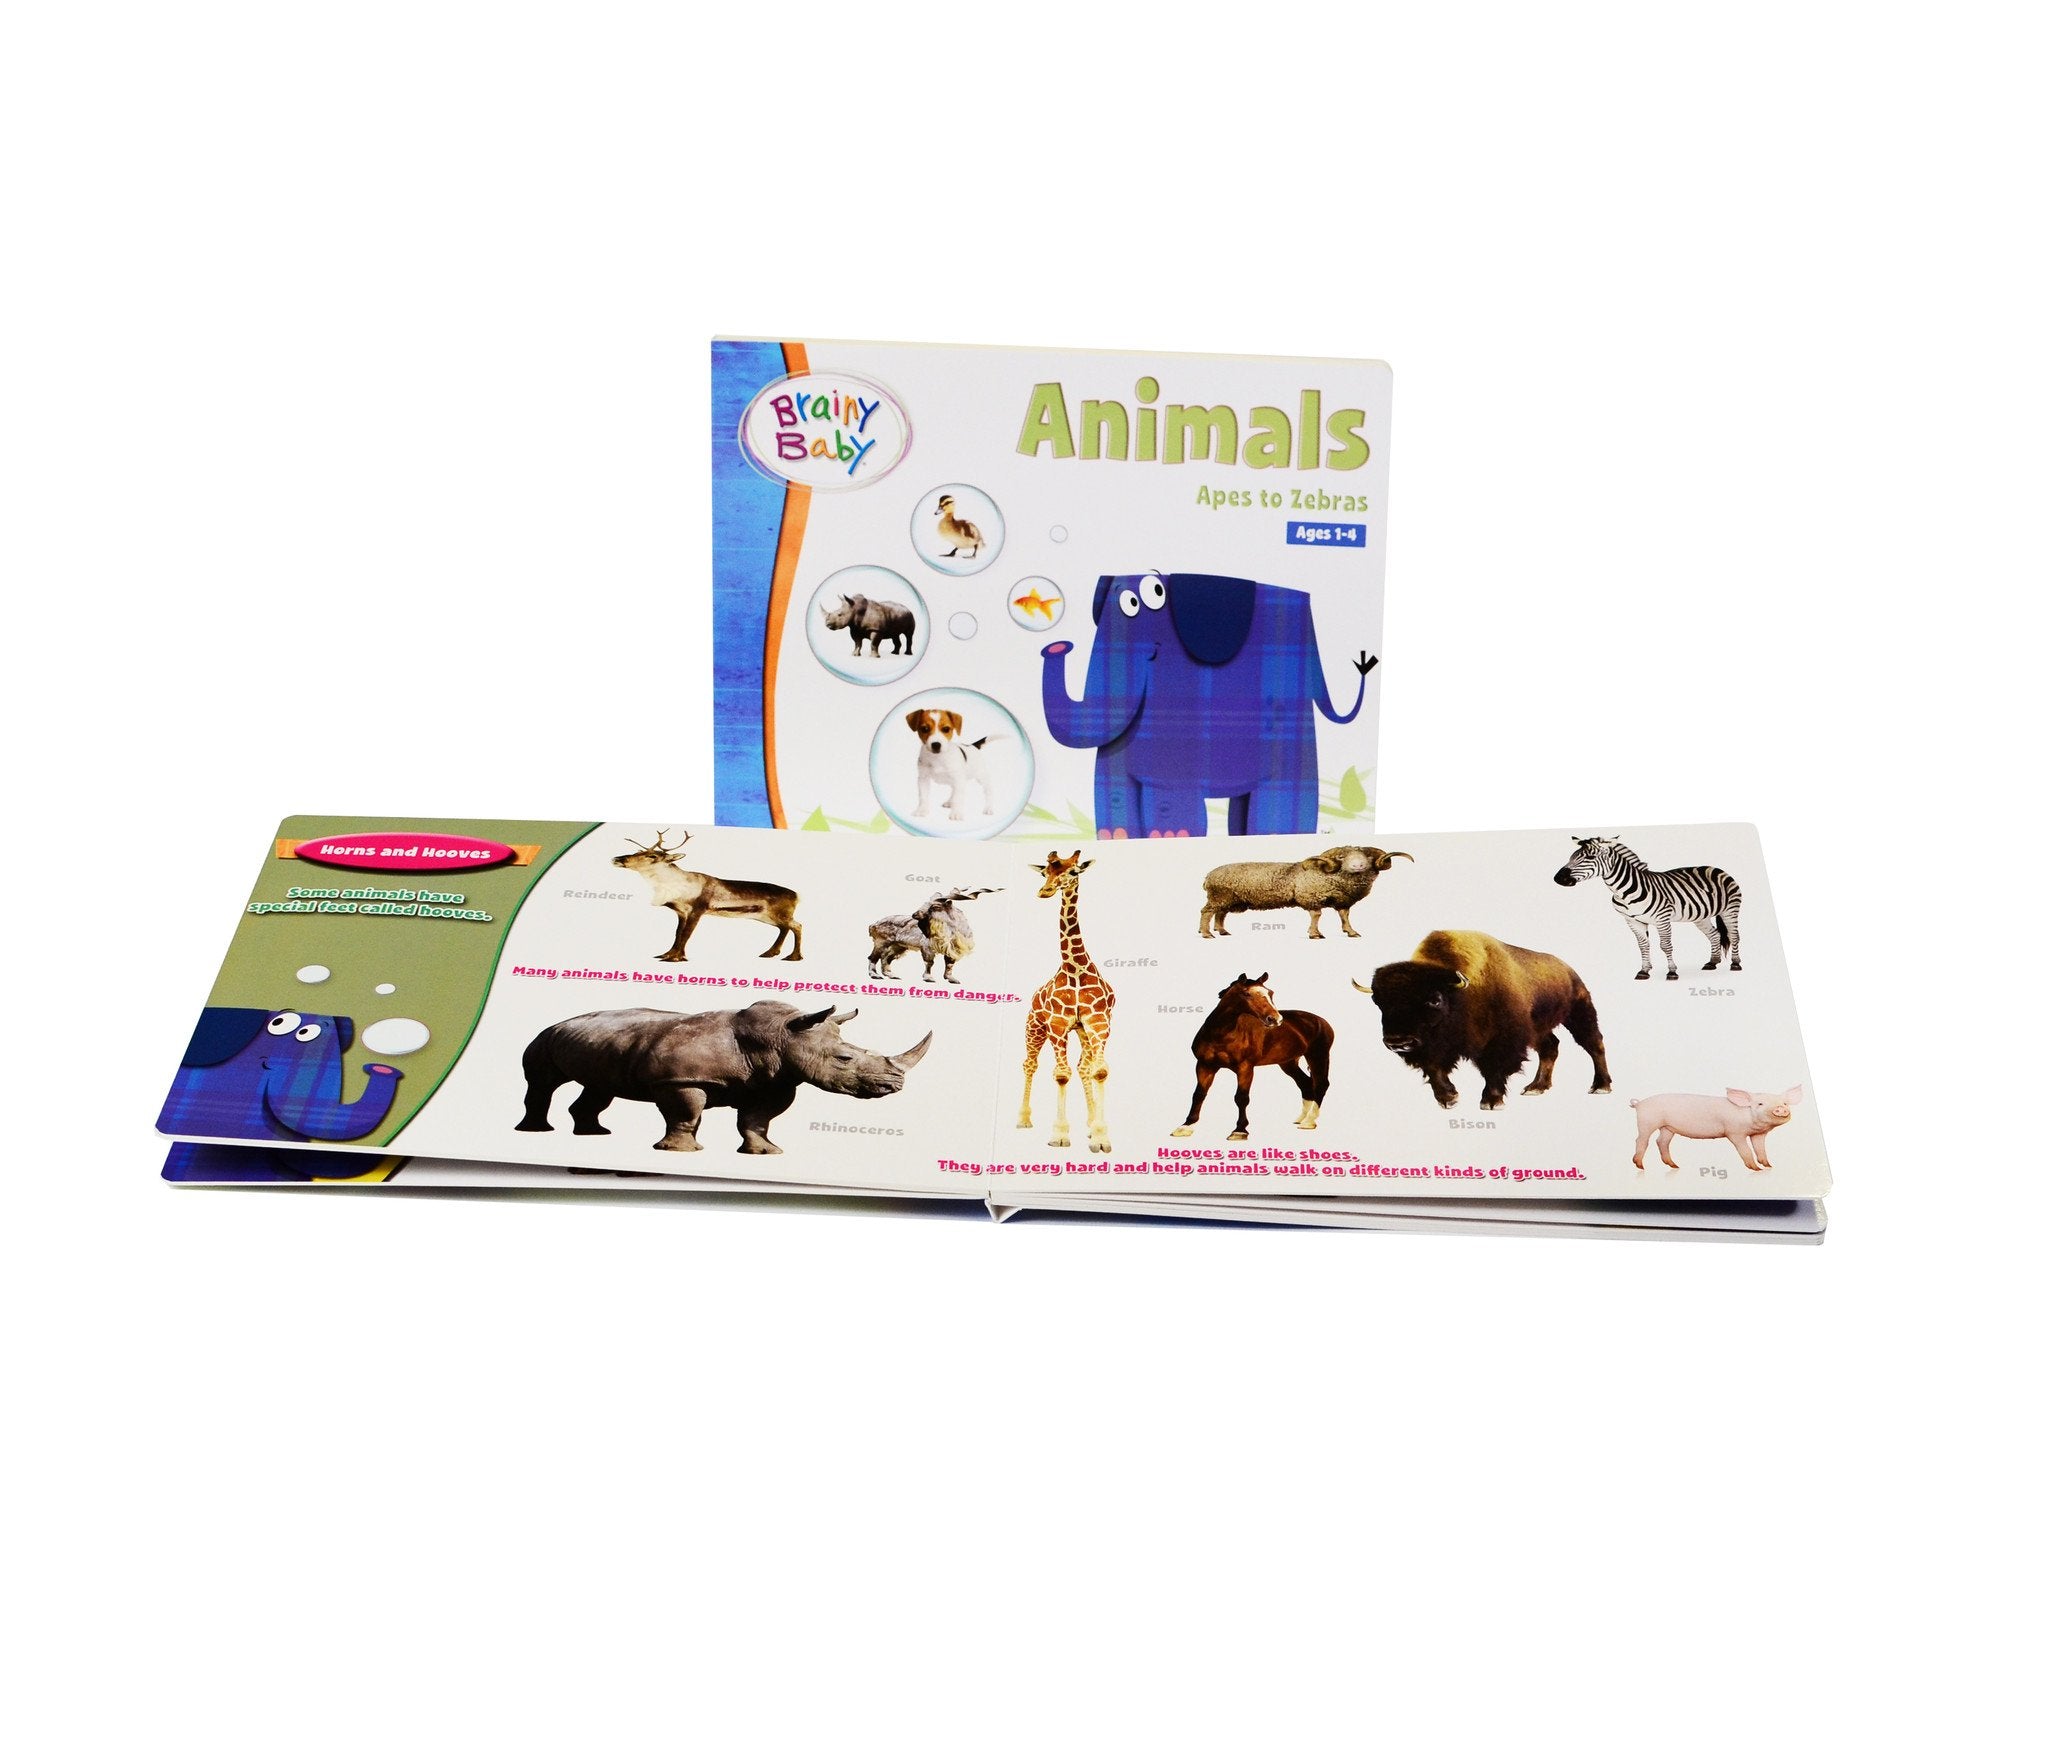 Brainy Baby Animals Board Book for Preschool Children Apes to Zebras Deluxe Edition